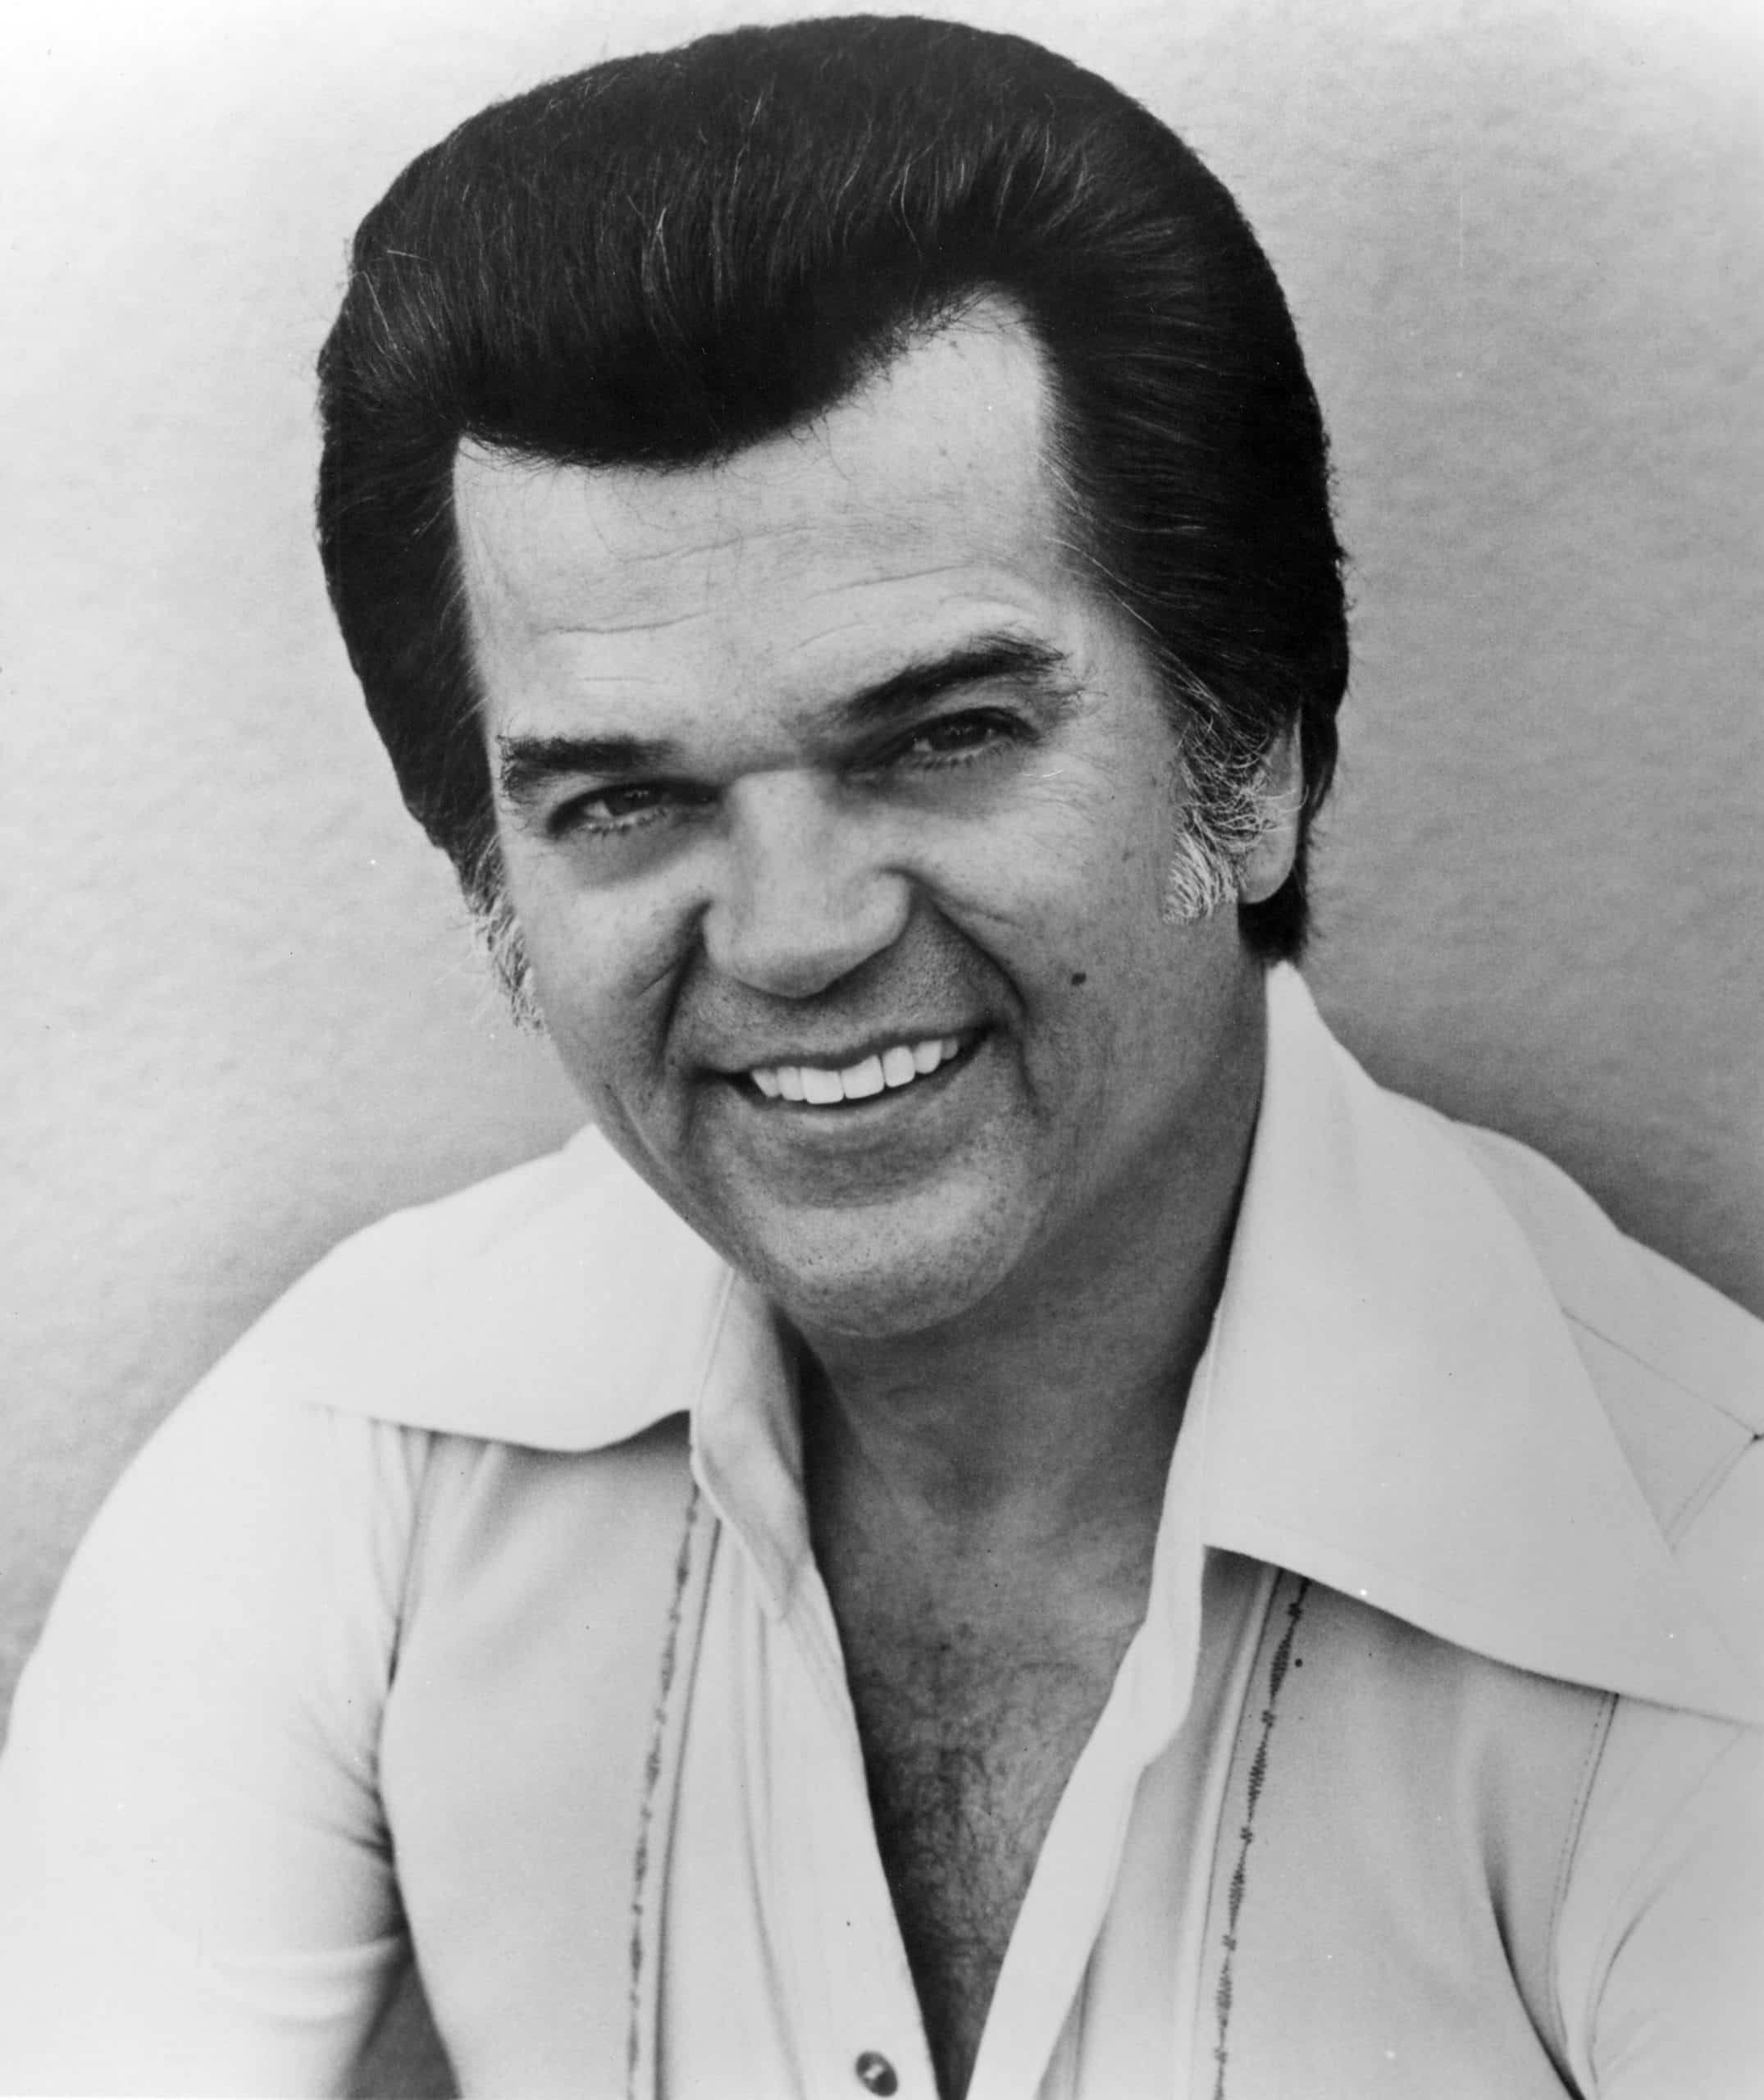 UNSPECIFIED - CIRCA 1970: Photo of Conway Twitty